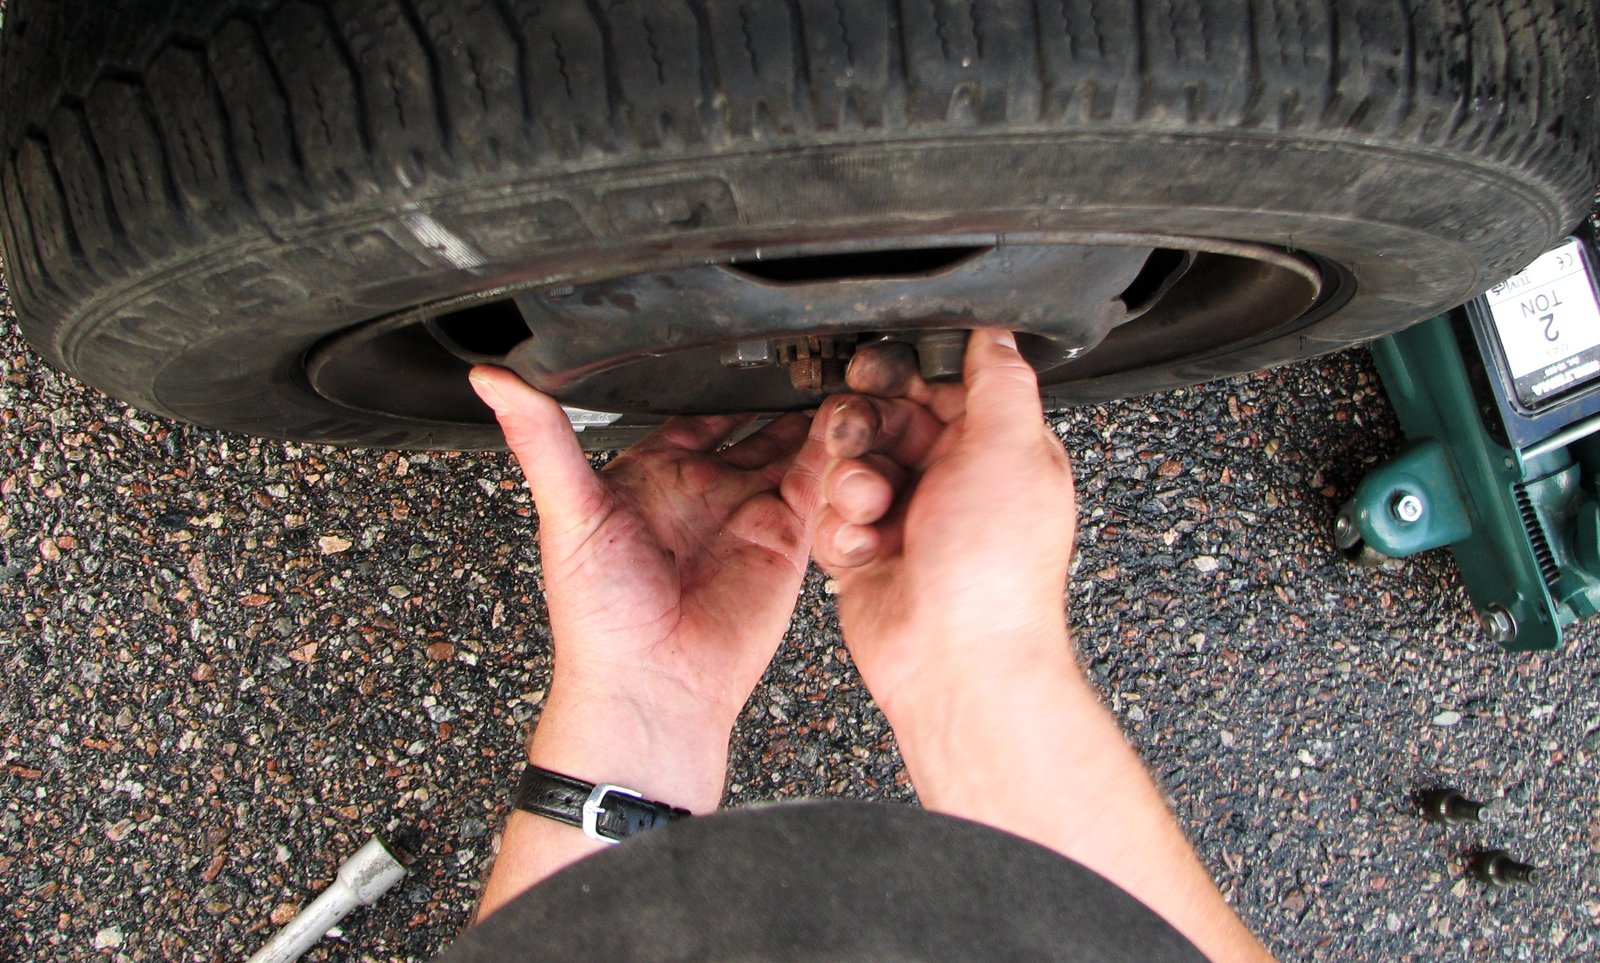 the view of hands working on the tire rim